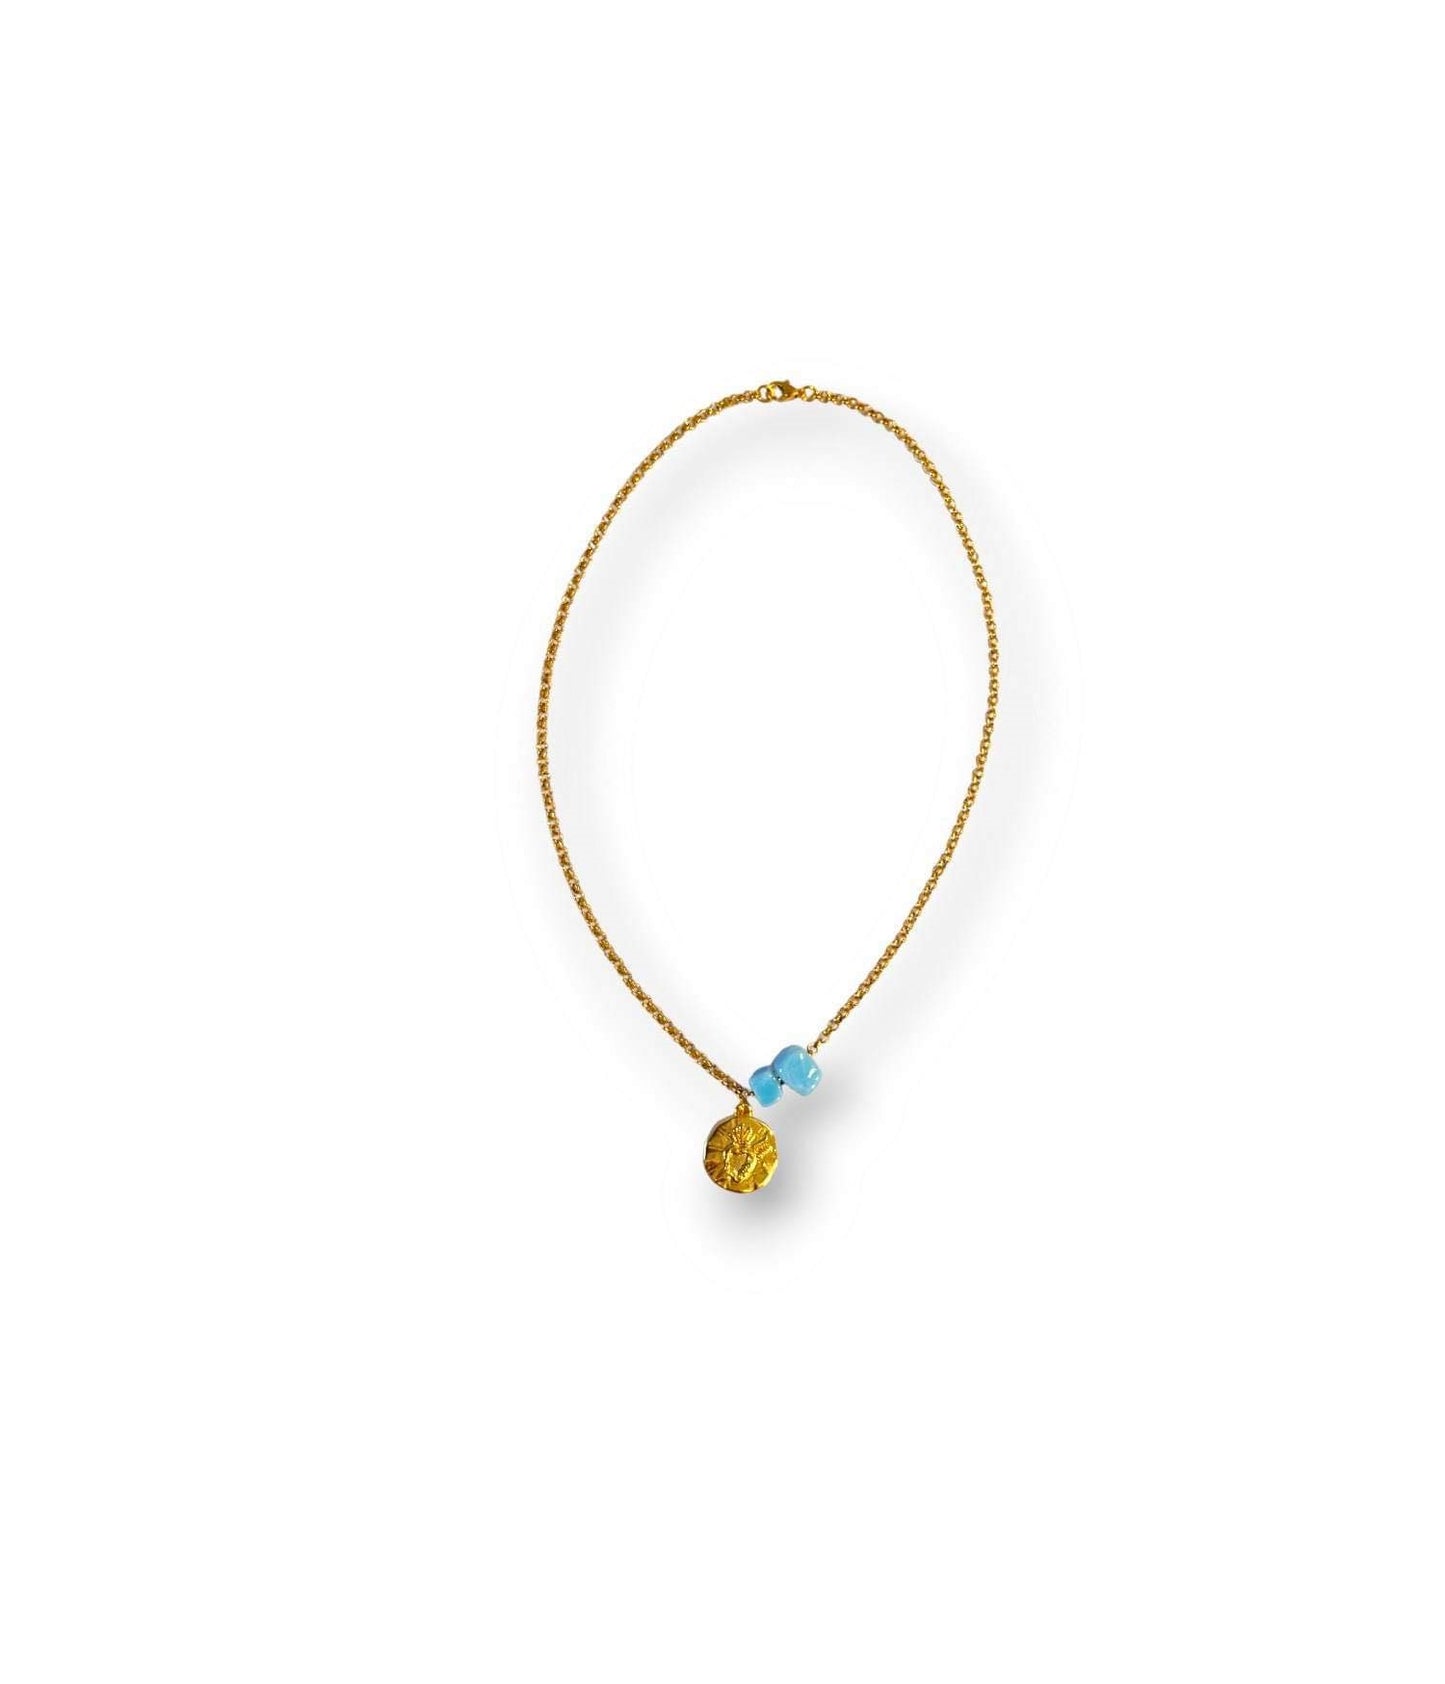 The Simple Gold Necklace